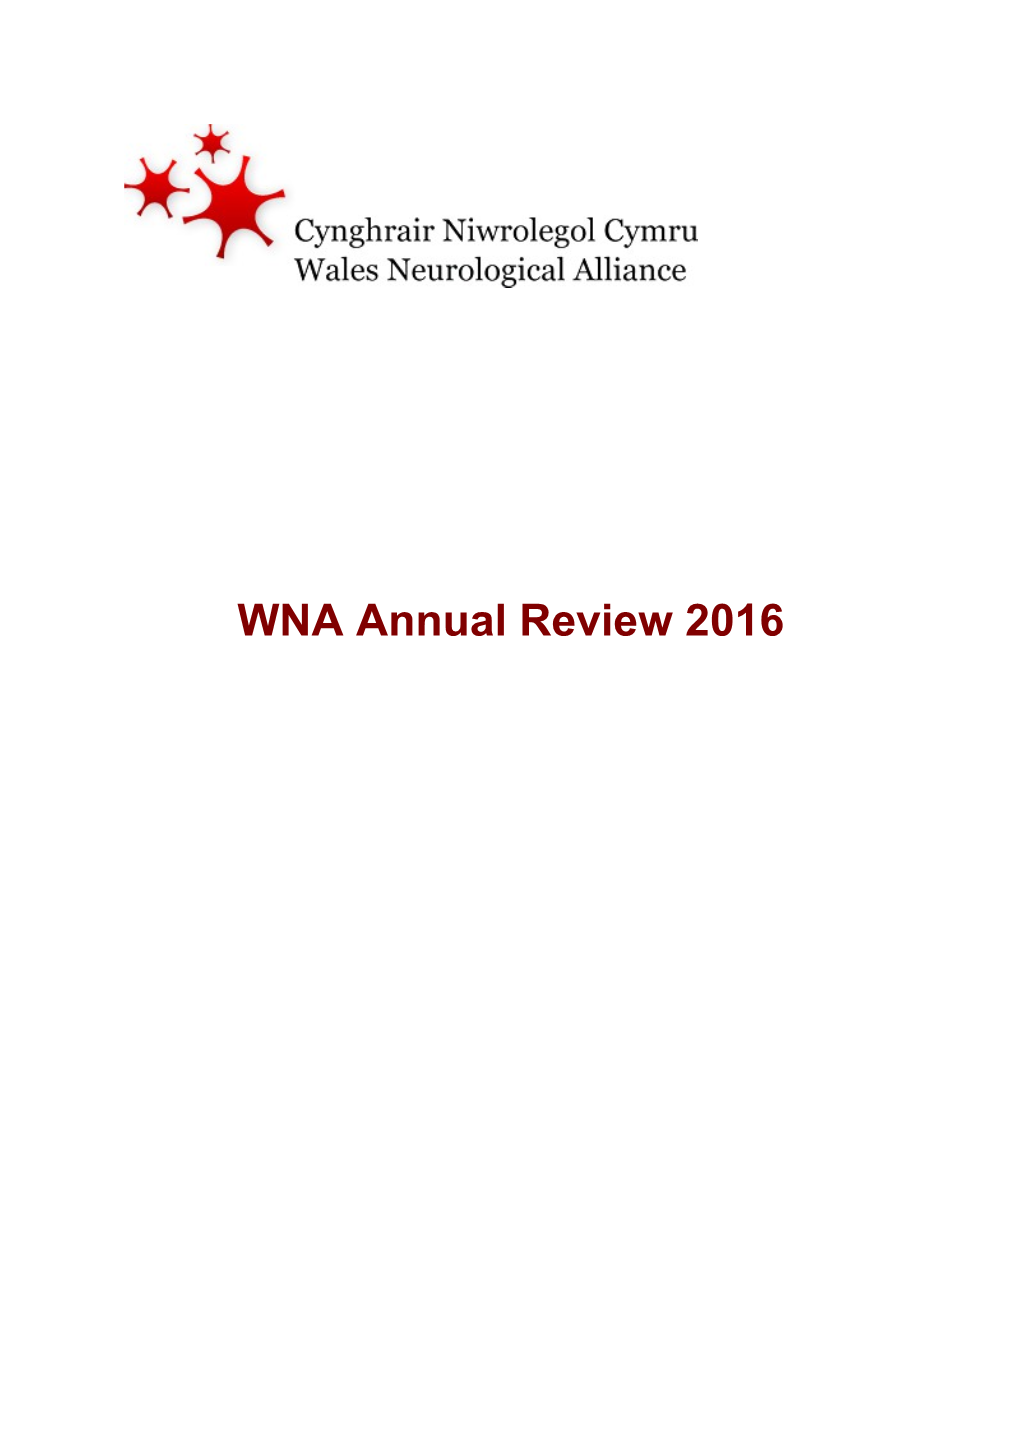 WNA Annual Review 2016